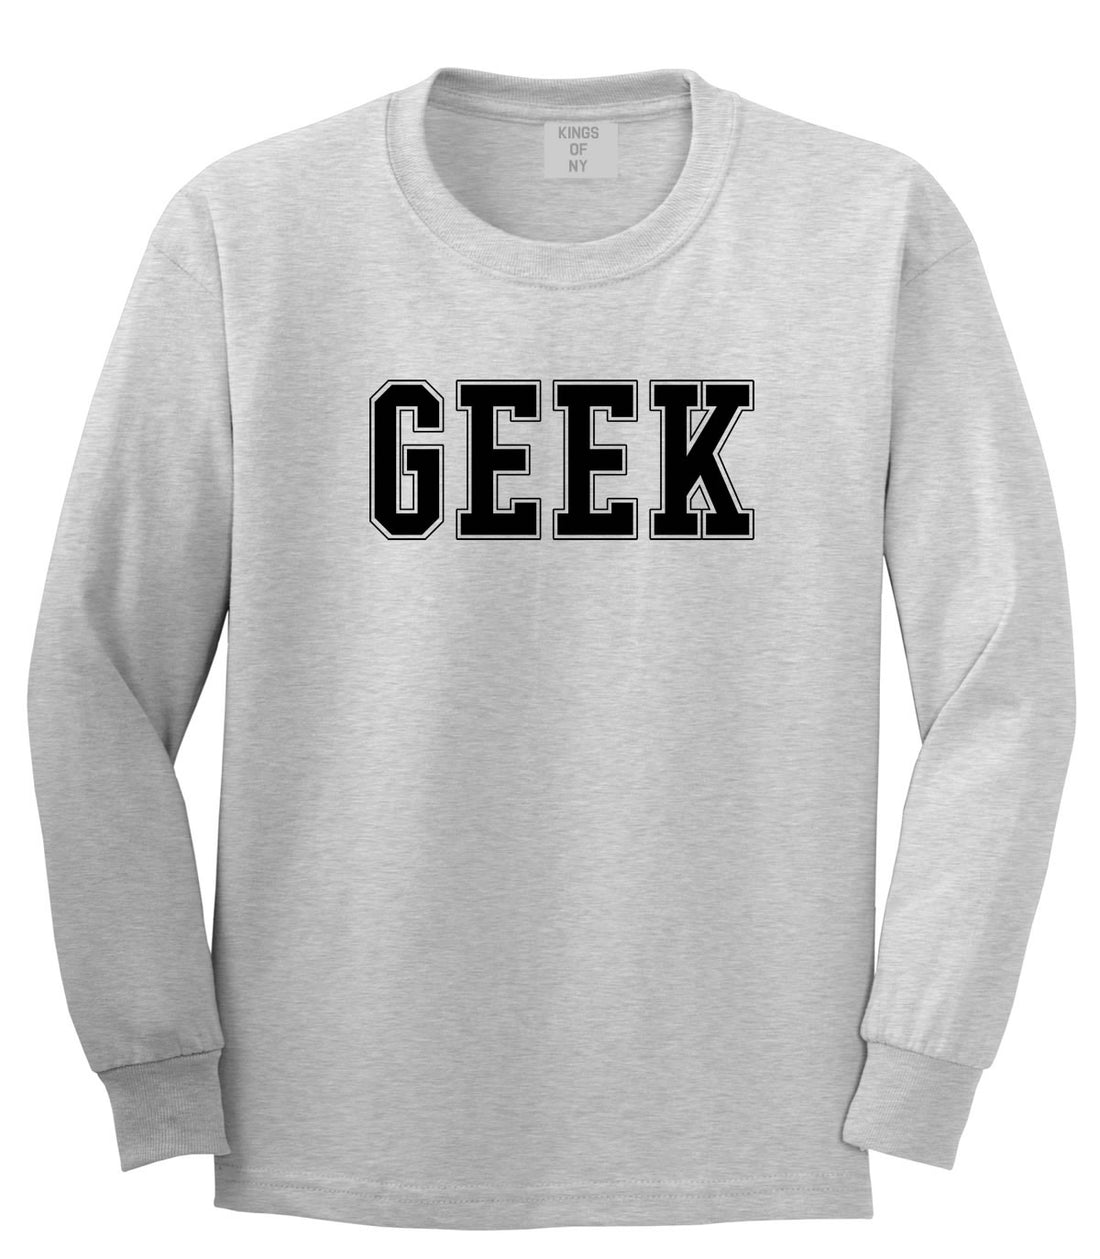 Geek College Style Long Sleeve T-Shirt in Grey By Kings Of NY